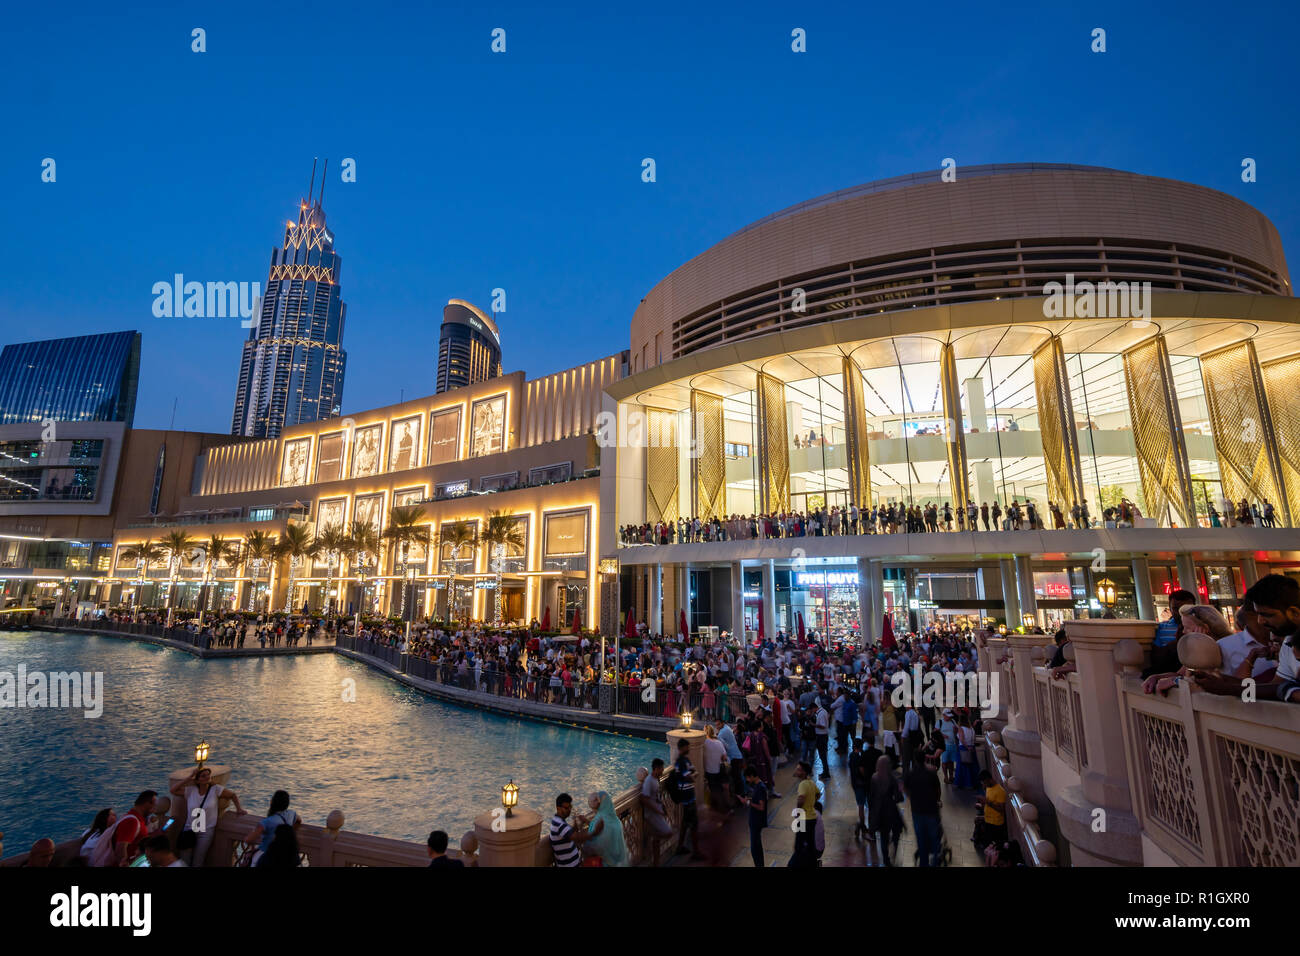 People visiting the Dubai Mall in UAE Stock Photo